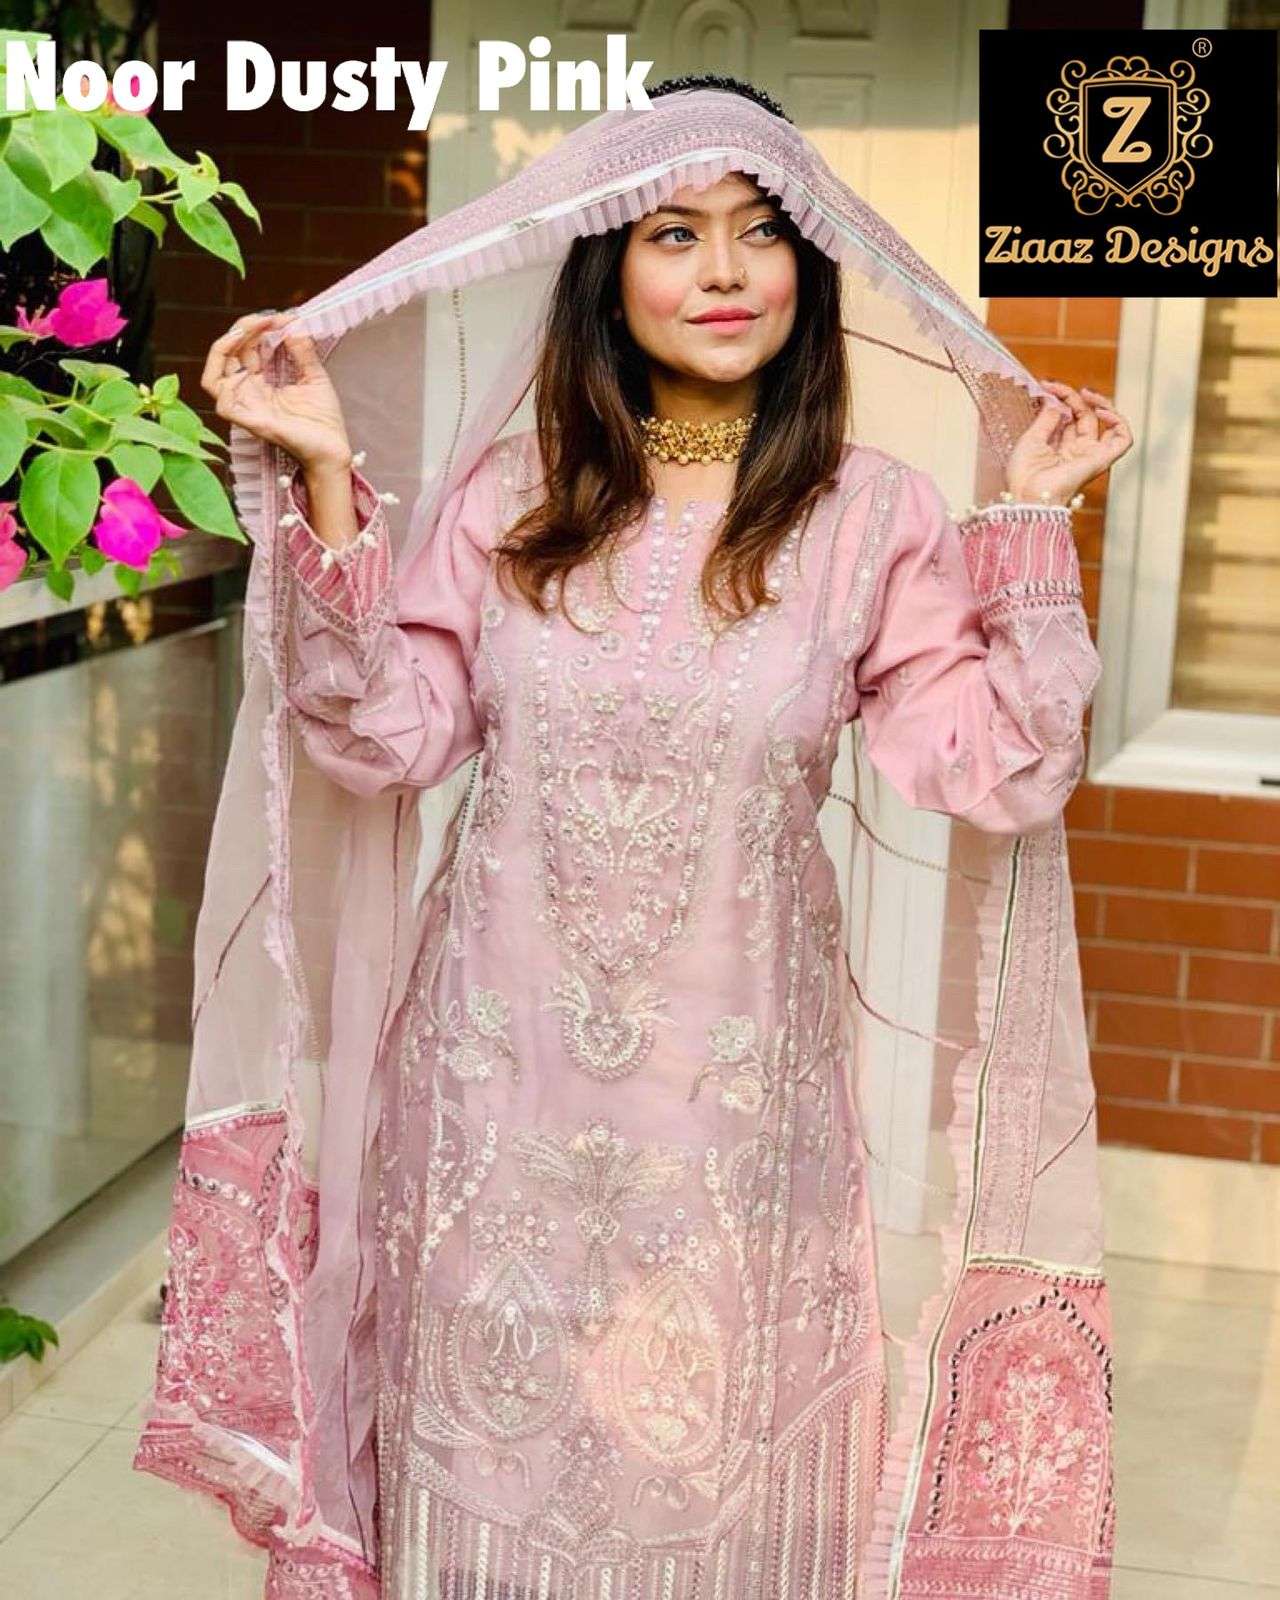 ziaaz designs noor dusty pink embroidery readymade pakistani suits